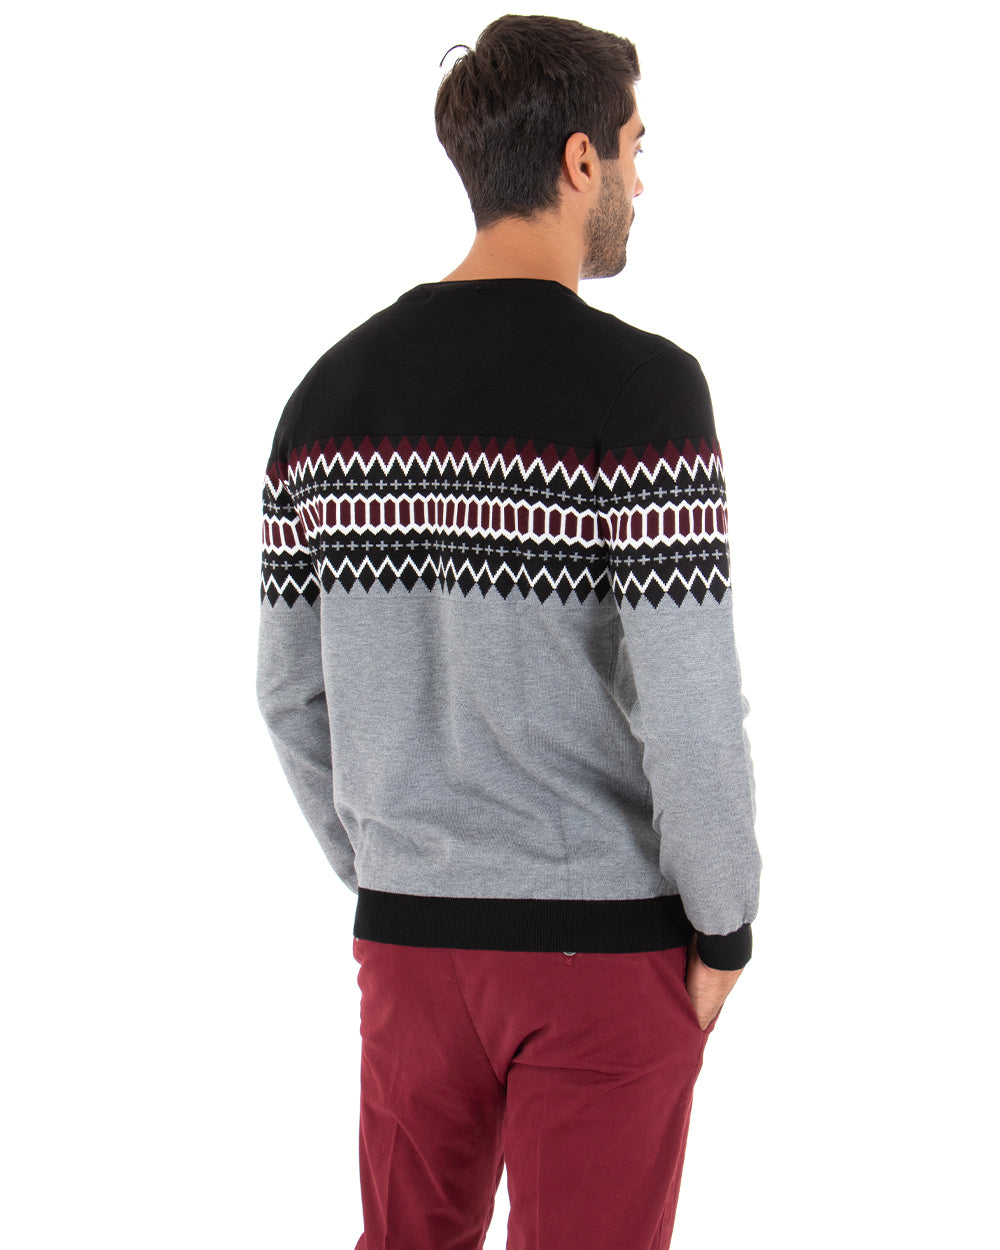 Men's Crew Neck Gray Patterned Long Sleeve Casual Sweater GIOSAL